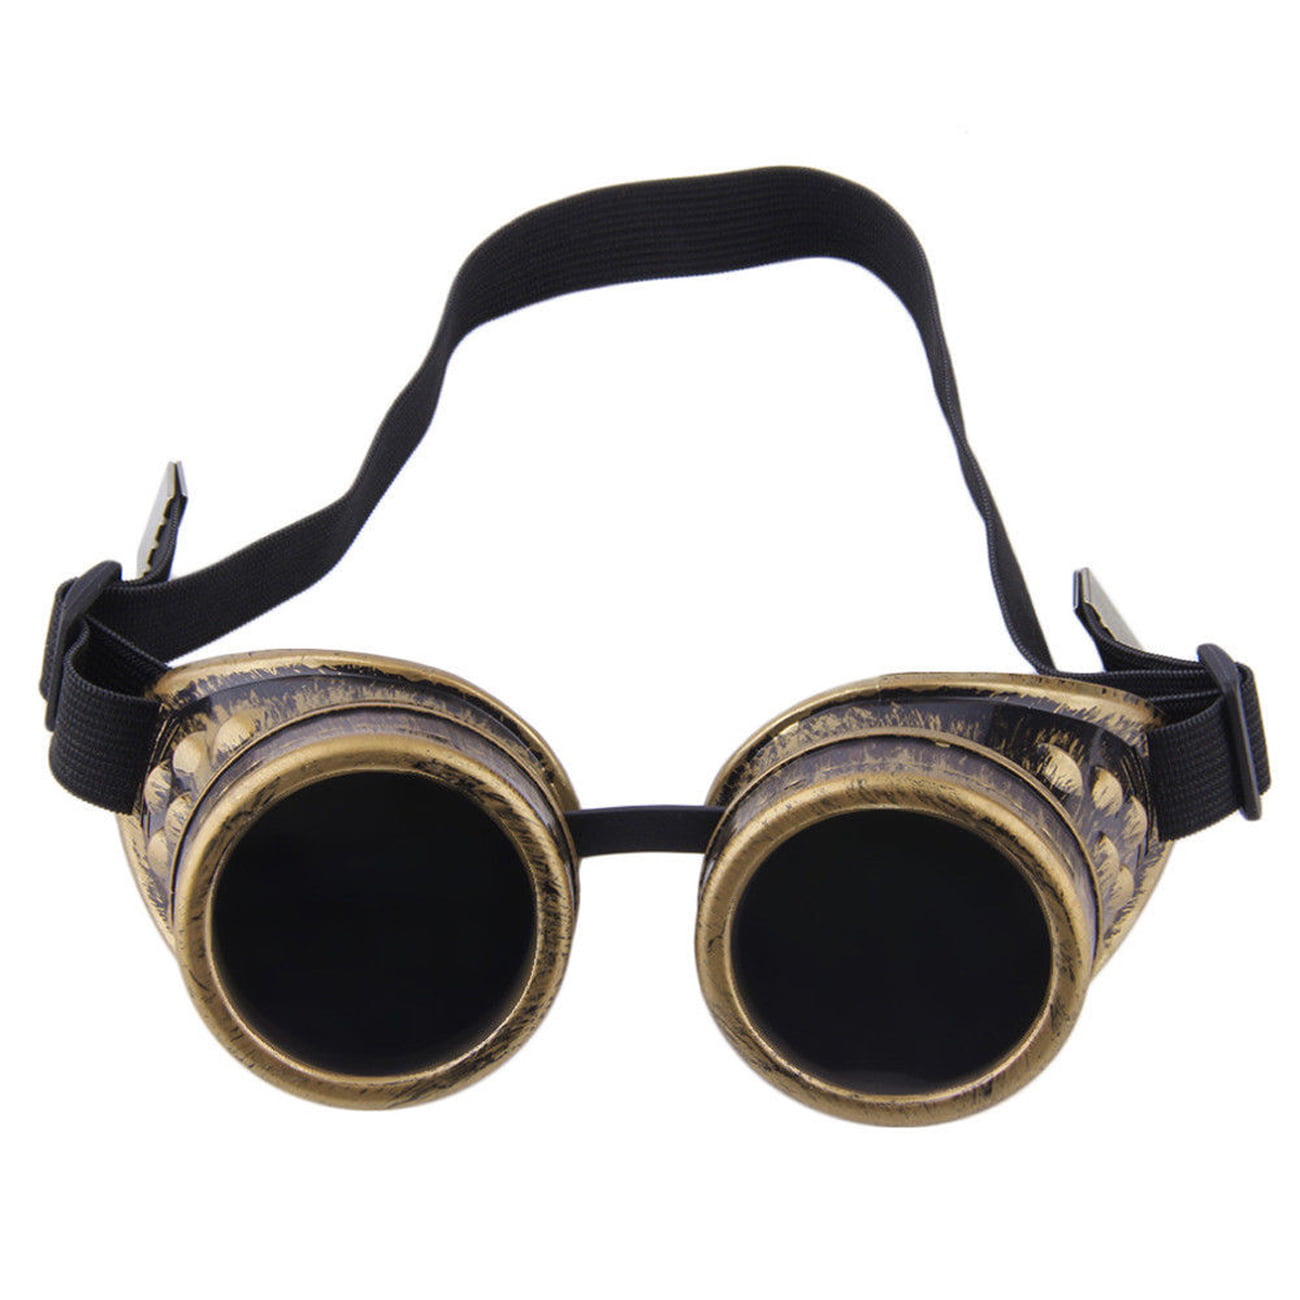 1, Black Vintage Cyber Steampunk Goggles Welding Goth Cosplay Festival Goggles Rustic Goggles